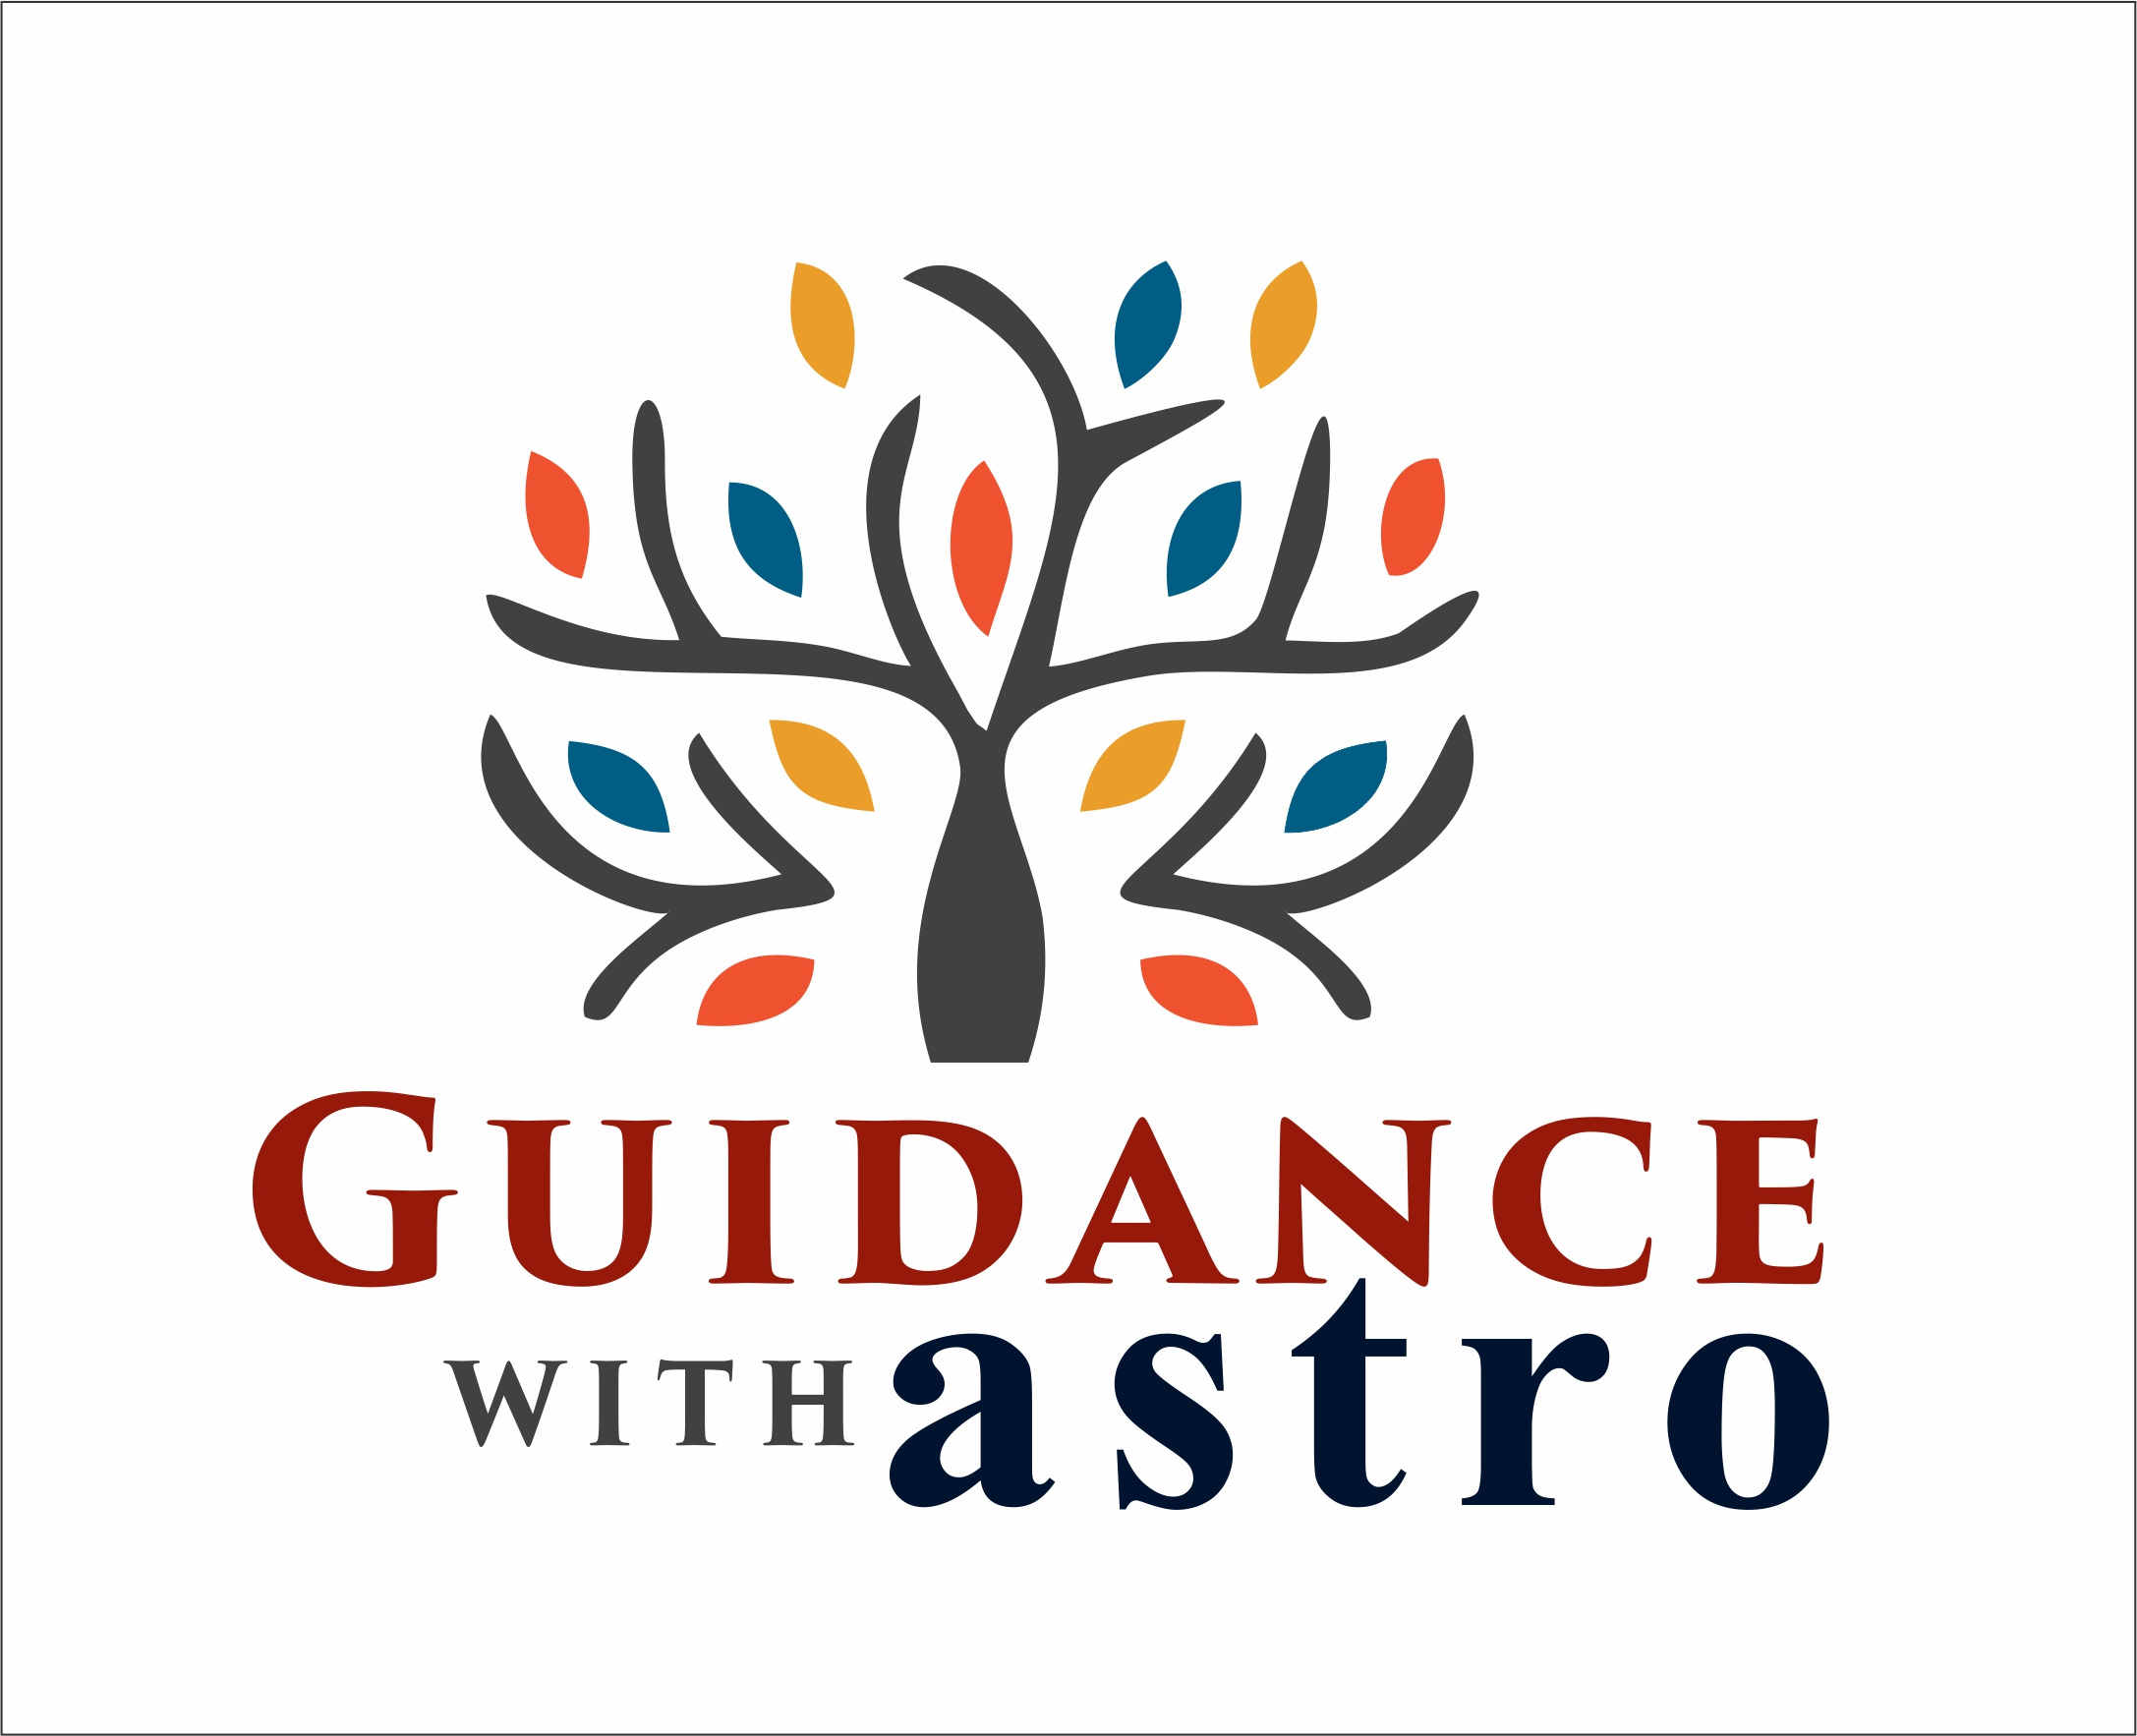 Guidance with Astro